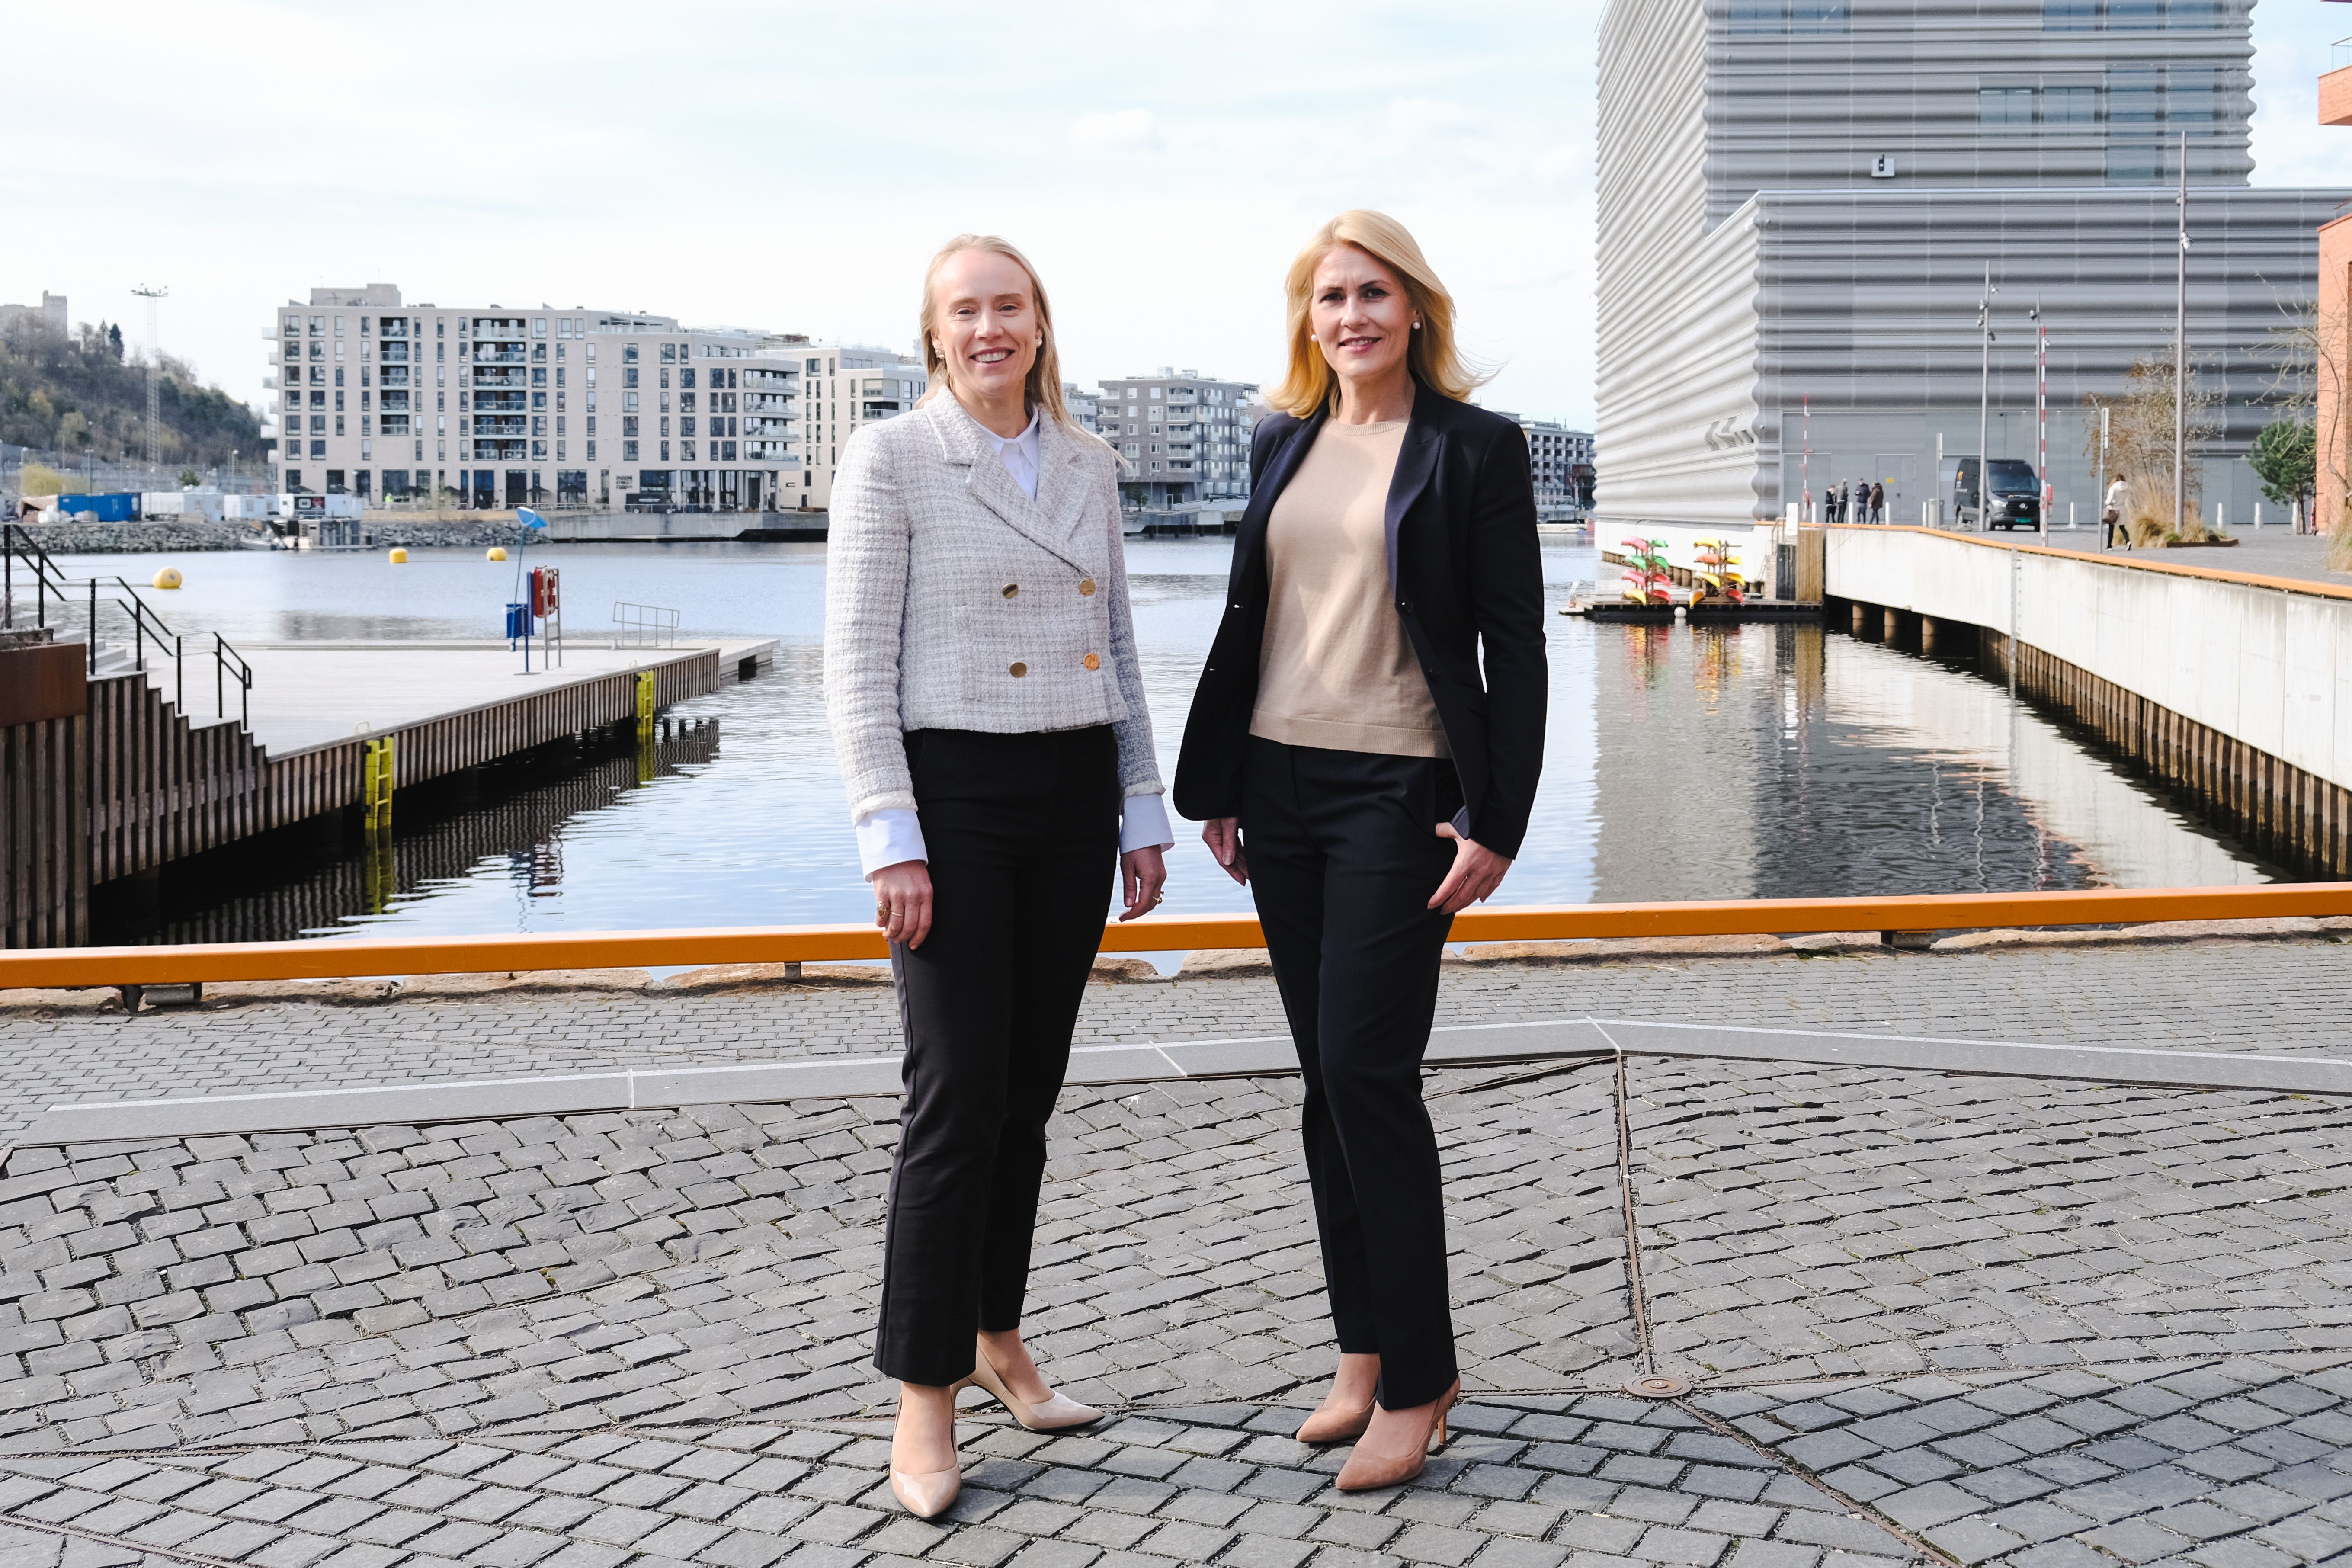 Runa Haug Khoury, CEO of AION and Kristine Dahl Steidel, General Manager of Microsoft Norway